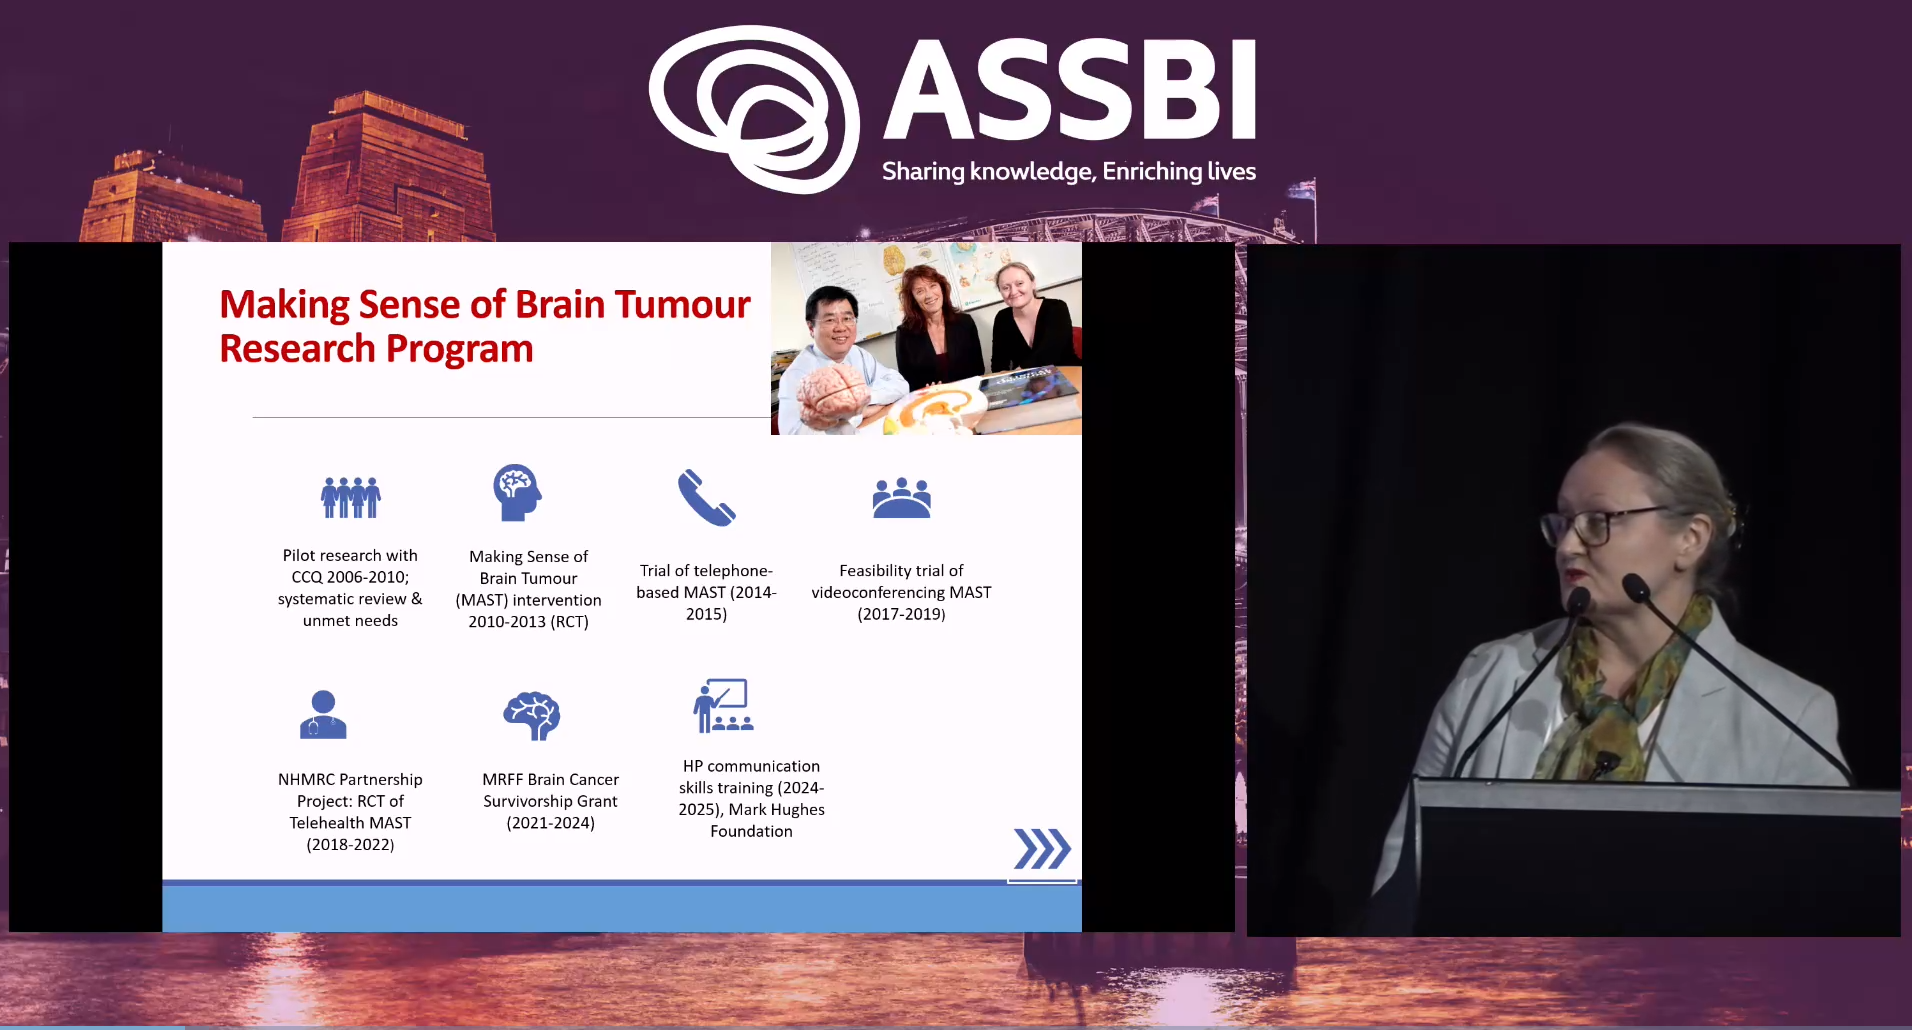 An inserted photo grab of Tamara Ownsworth as she is presenting at ASSBI, on a black background, to the right hand side. To the left is a slide from Tamara's presentation. The background is purple with the ASSBI logo in white at the top. 